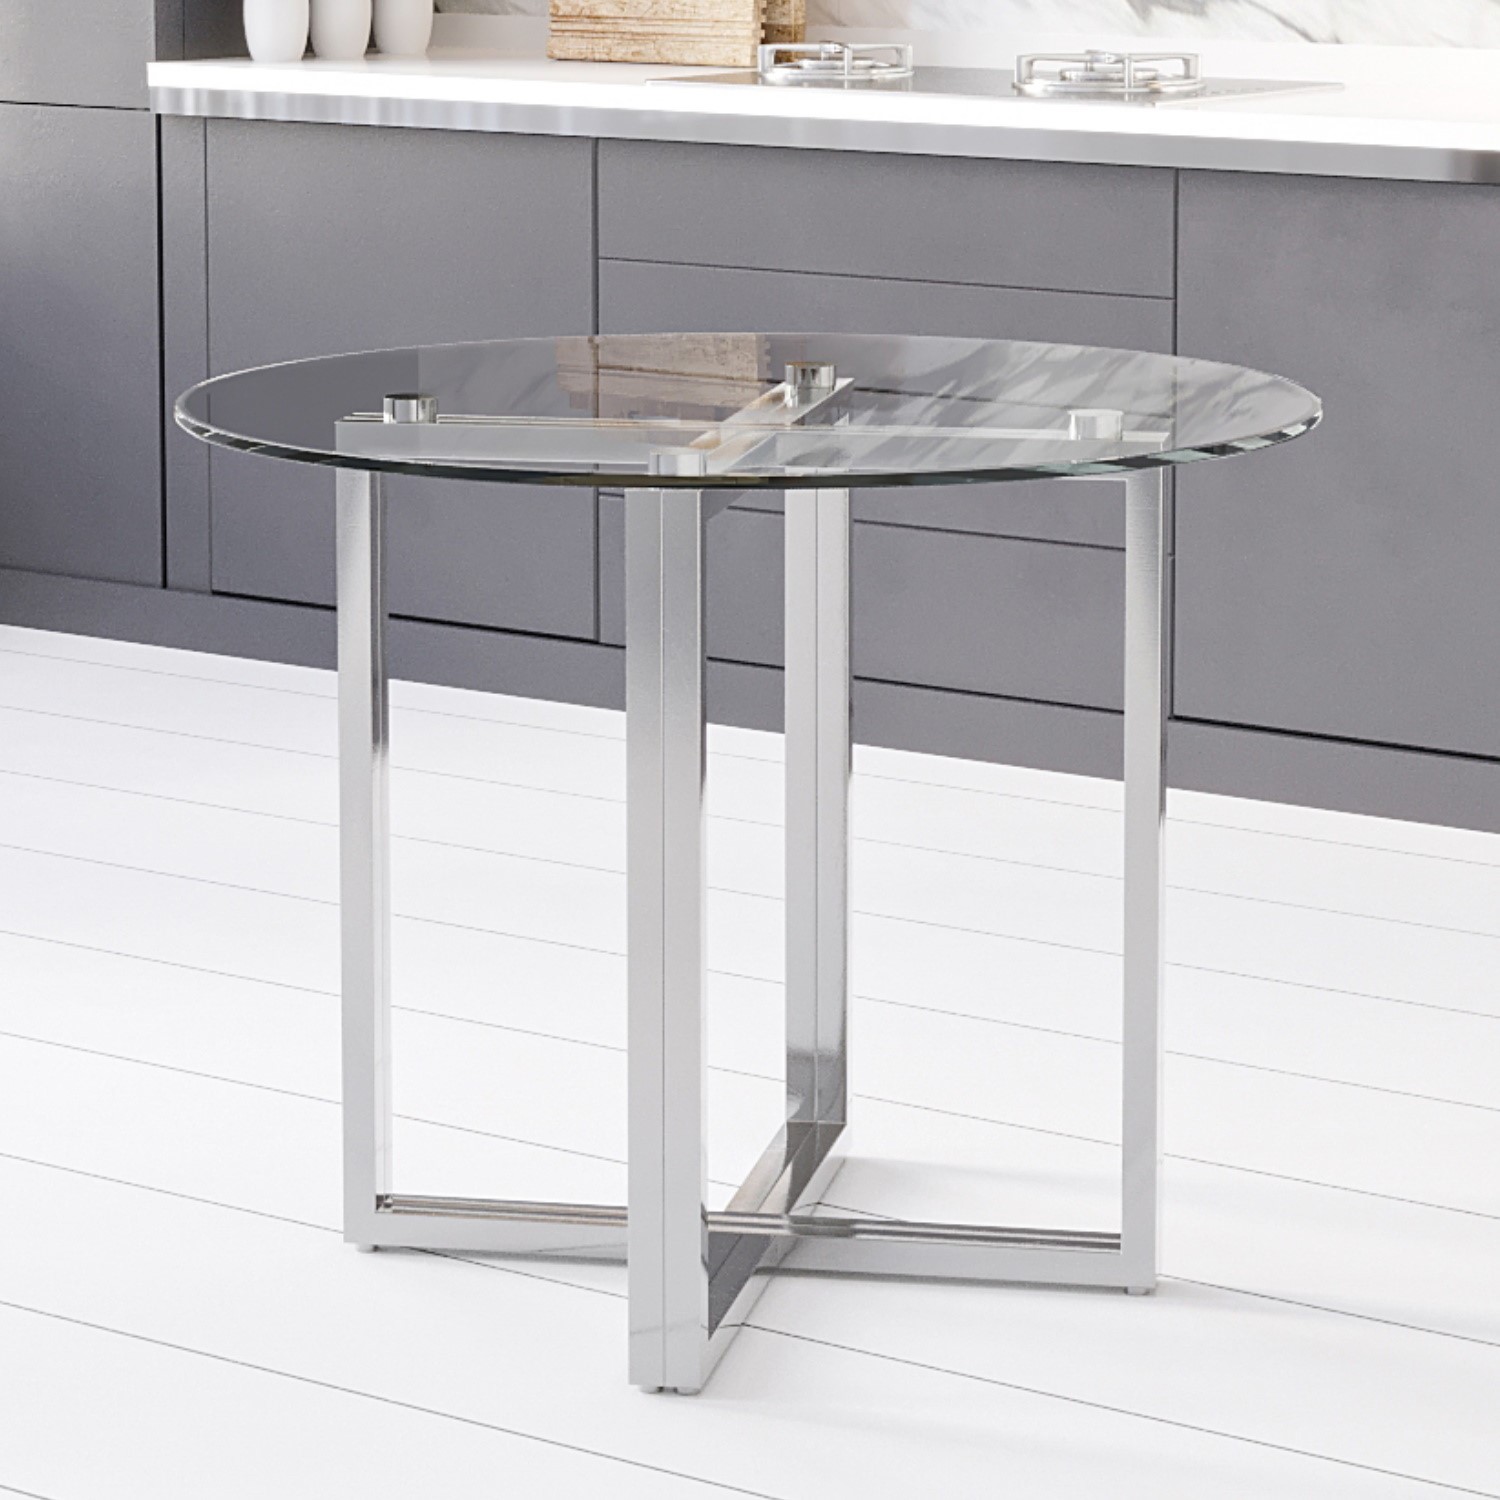 Photo of Round glass dining table with mirrored legs - seats 4 - alana boutique